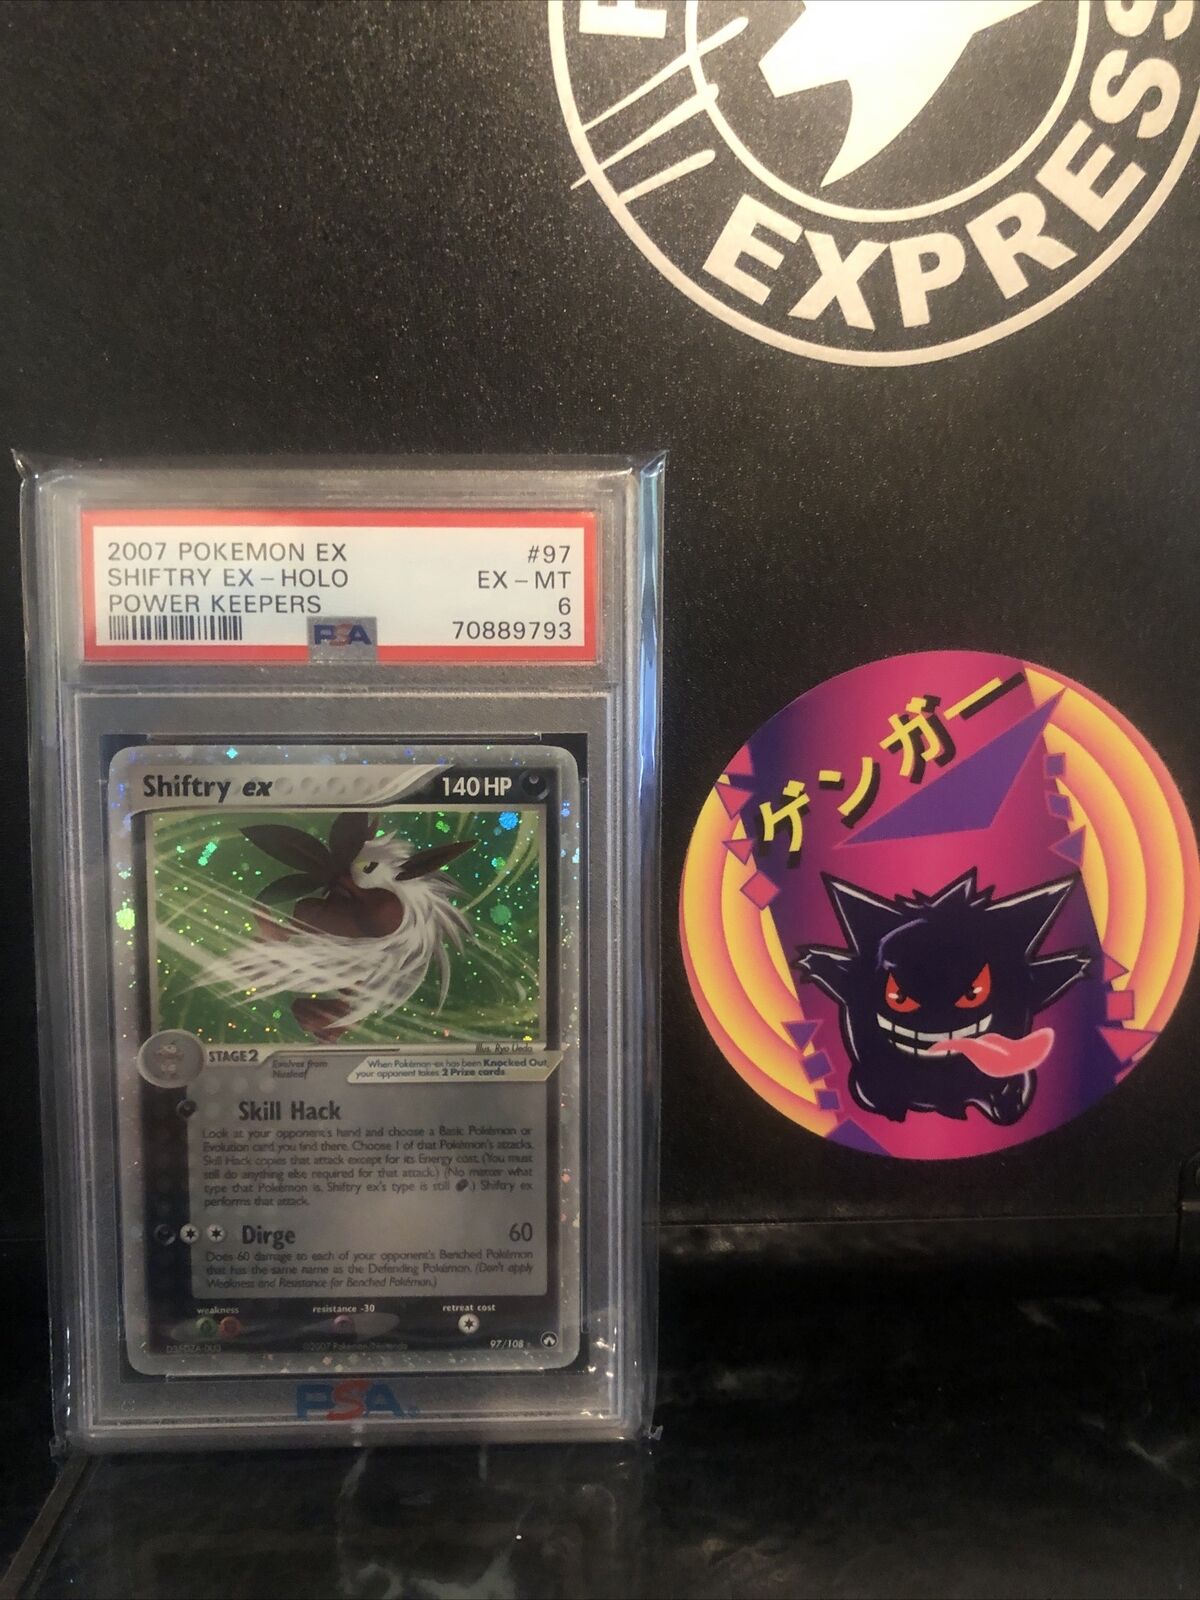 2007 POKEMON EX SHIFTRY EX-HOLO POWER KEEPERS #97/108 - PSA 6 EX-MT